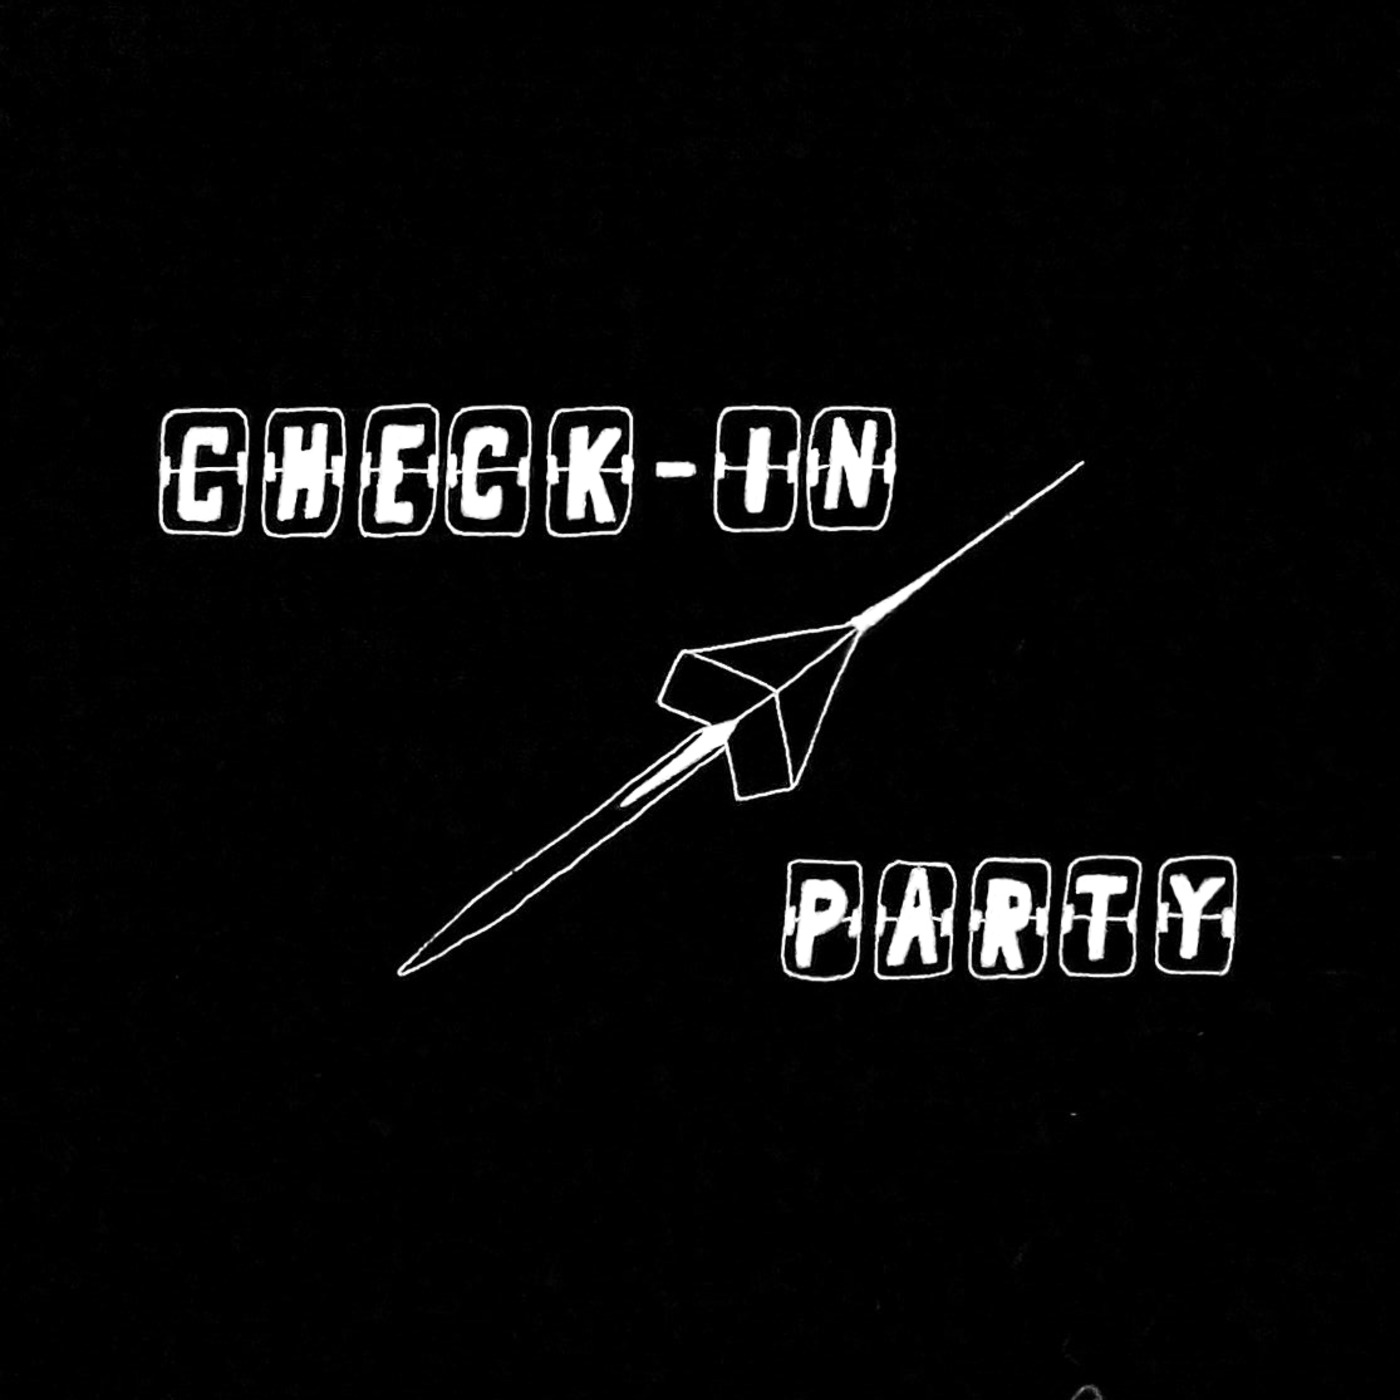 Check in Party